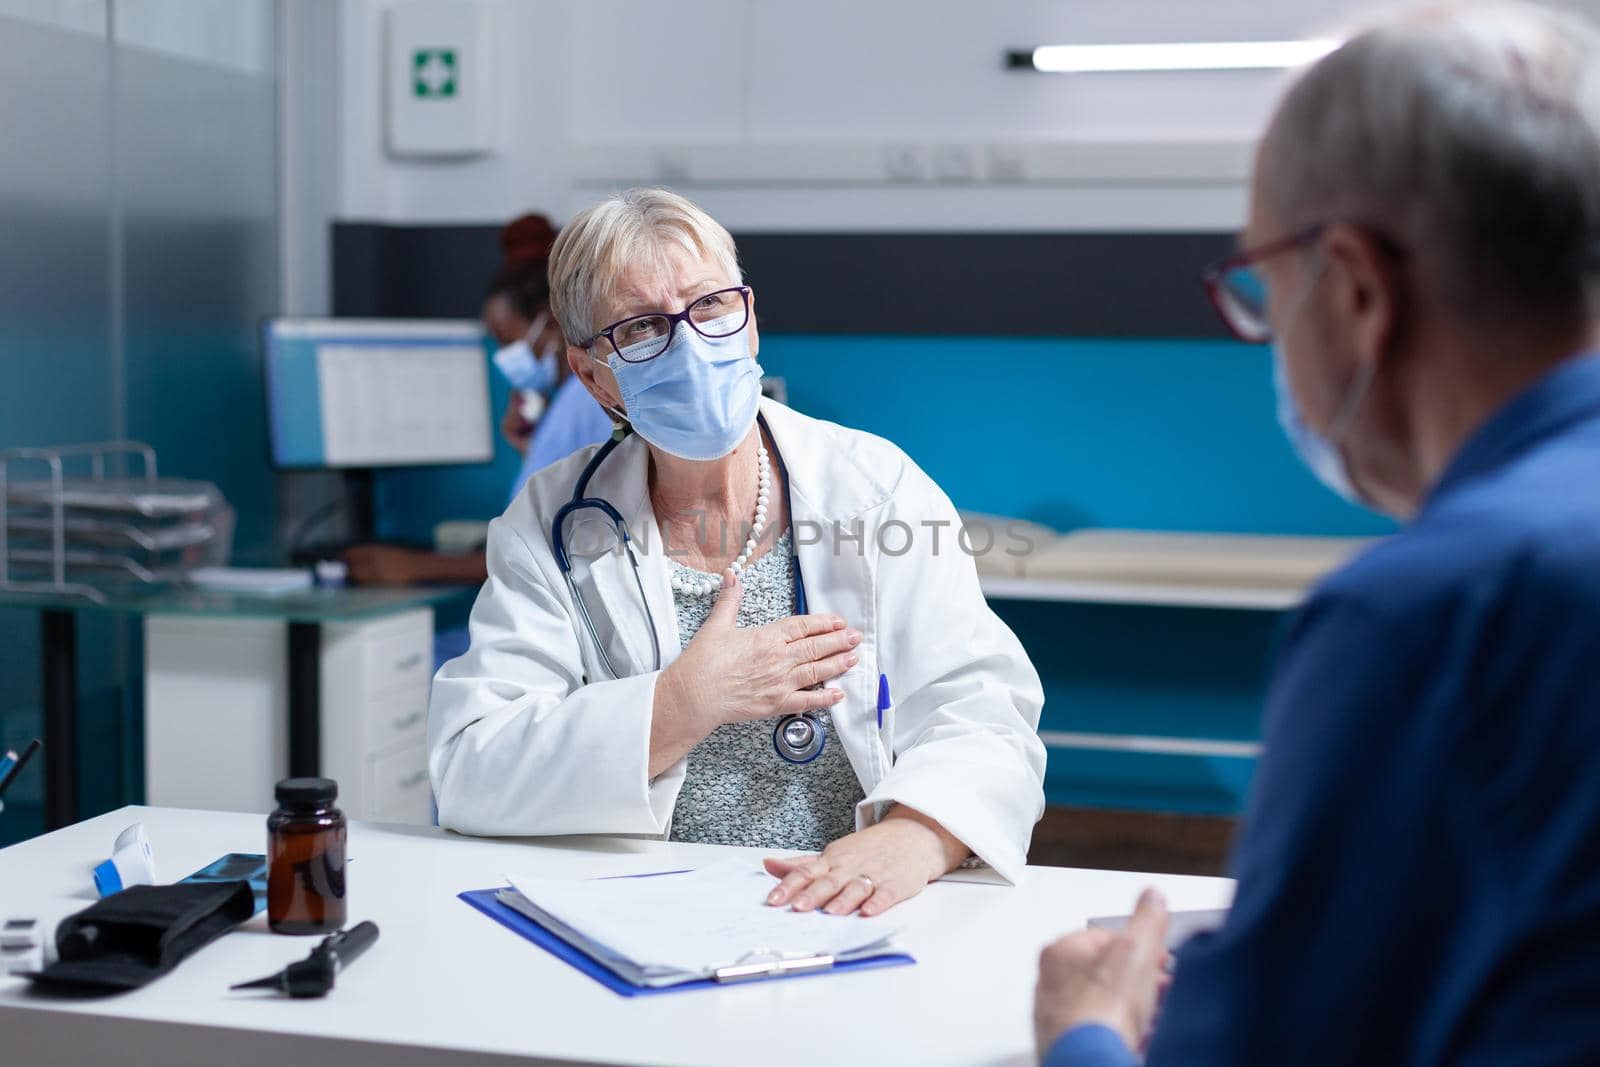 Woman doctor having checkup appointment with old patient, wearing face mask. Physician having conversation with man about healthcare and medical diagnosis in cabinet during pandemic.